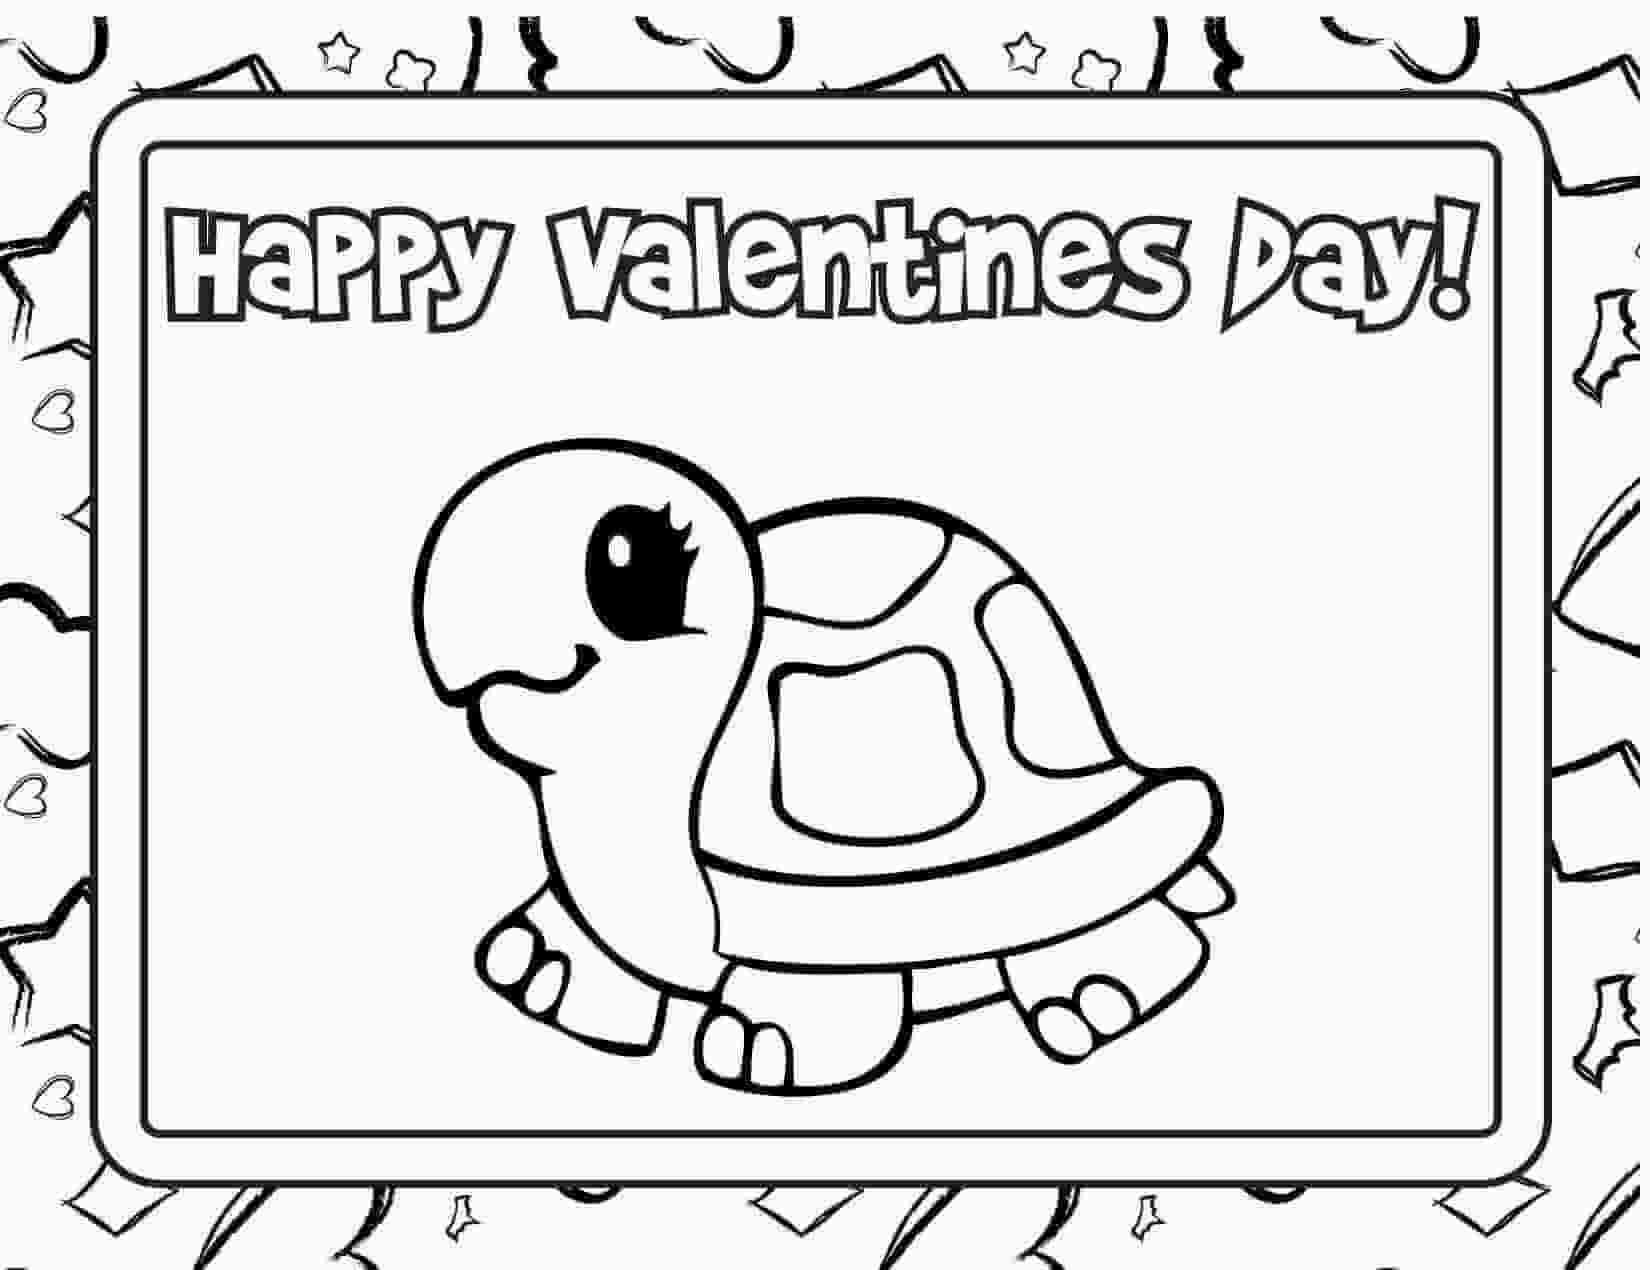 Happy Valentines Day coloring pages